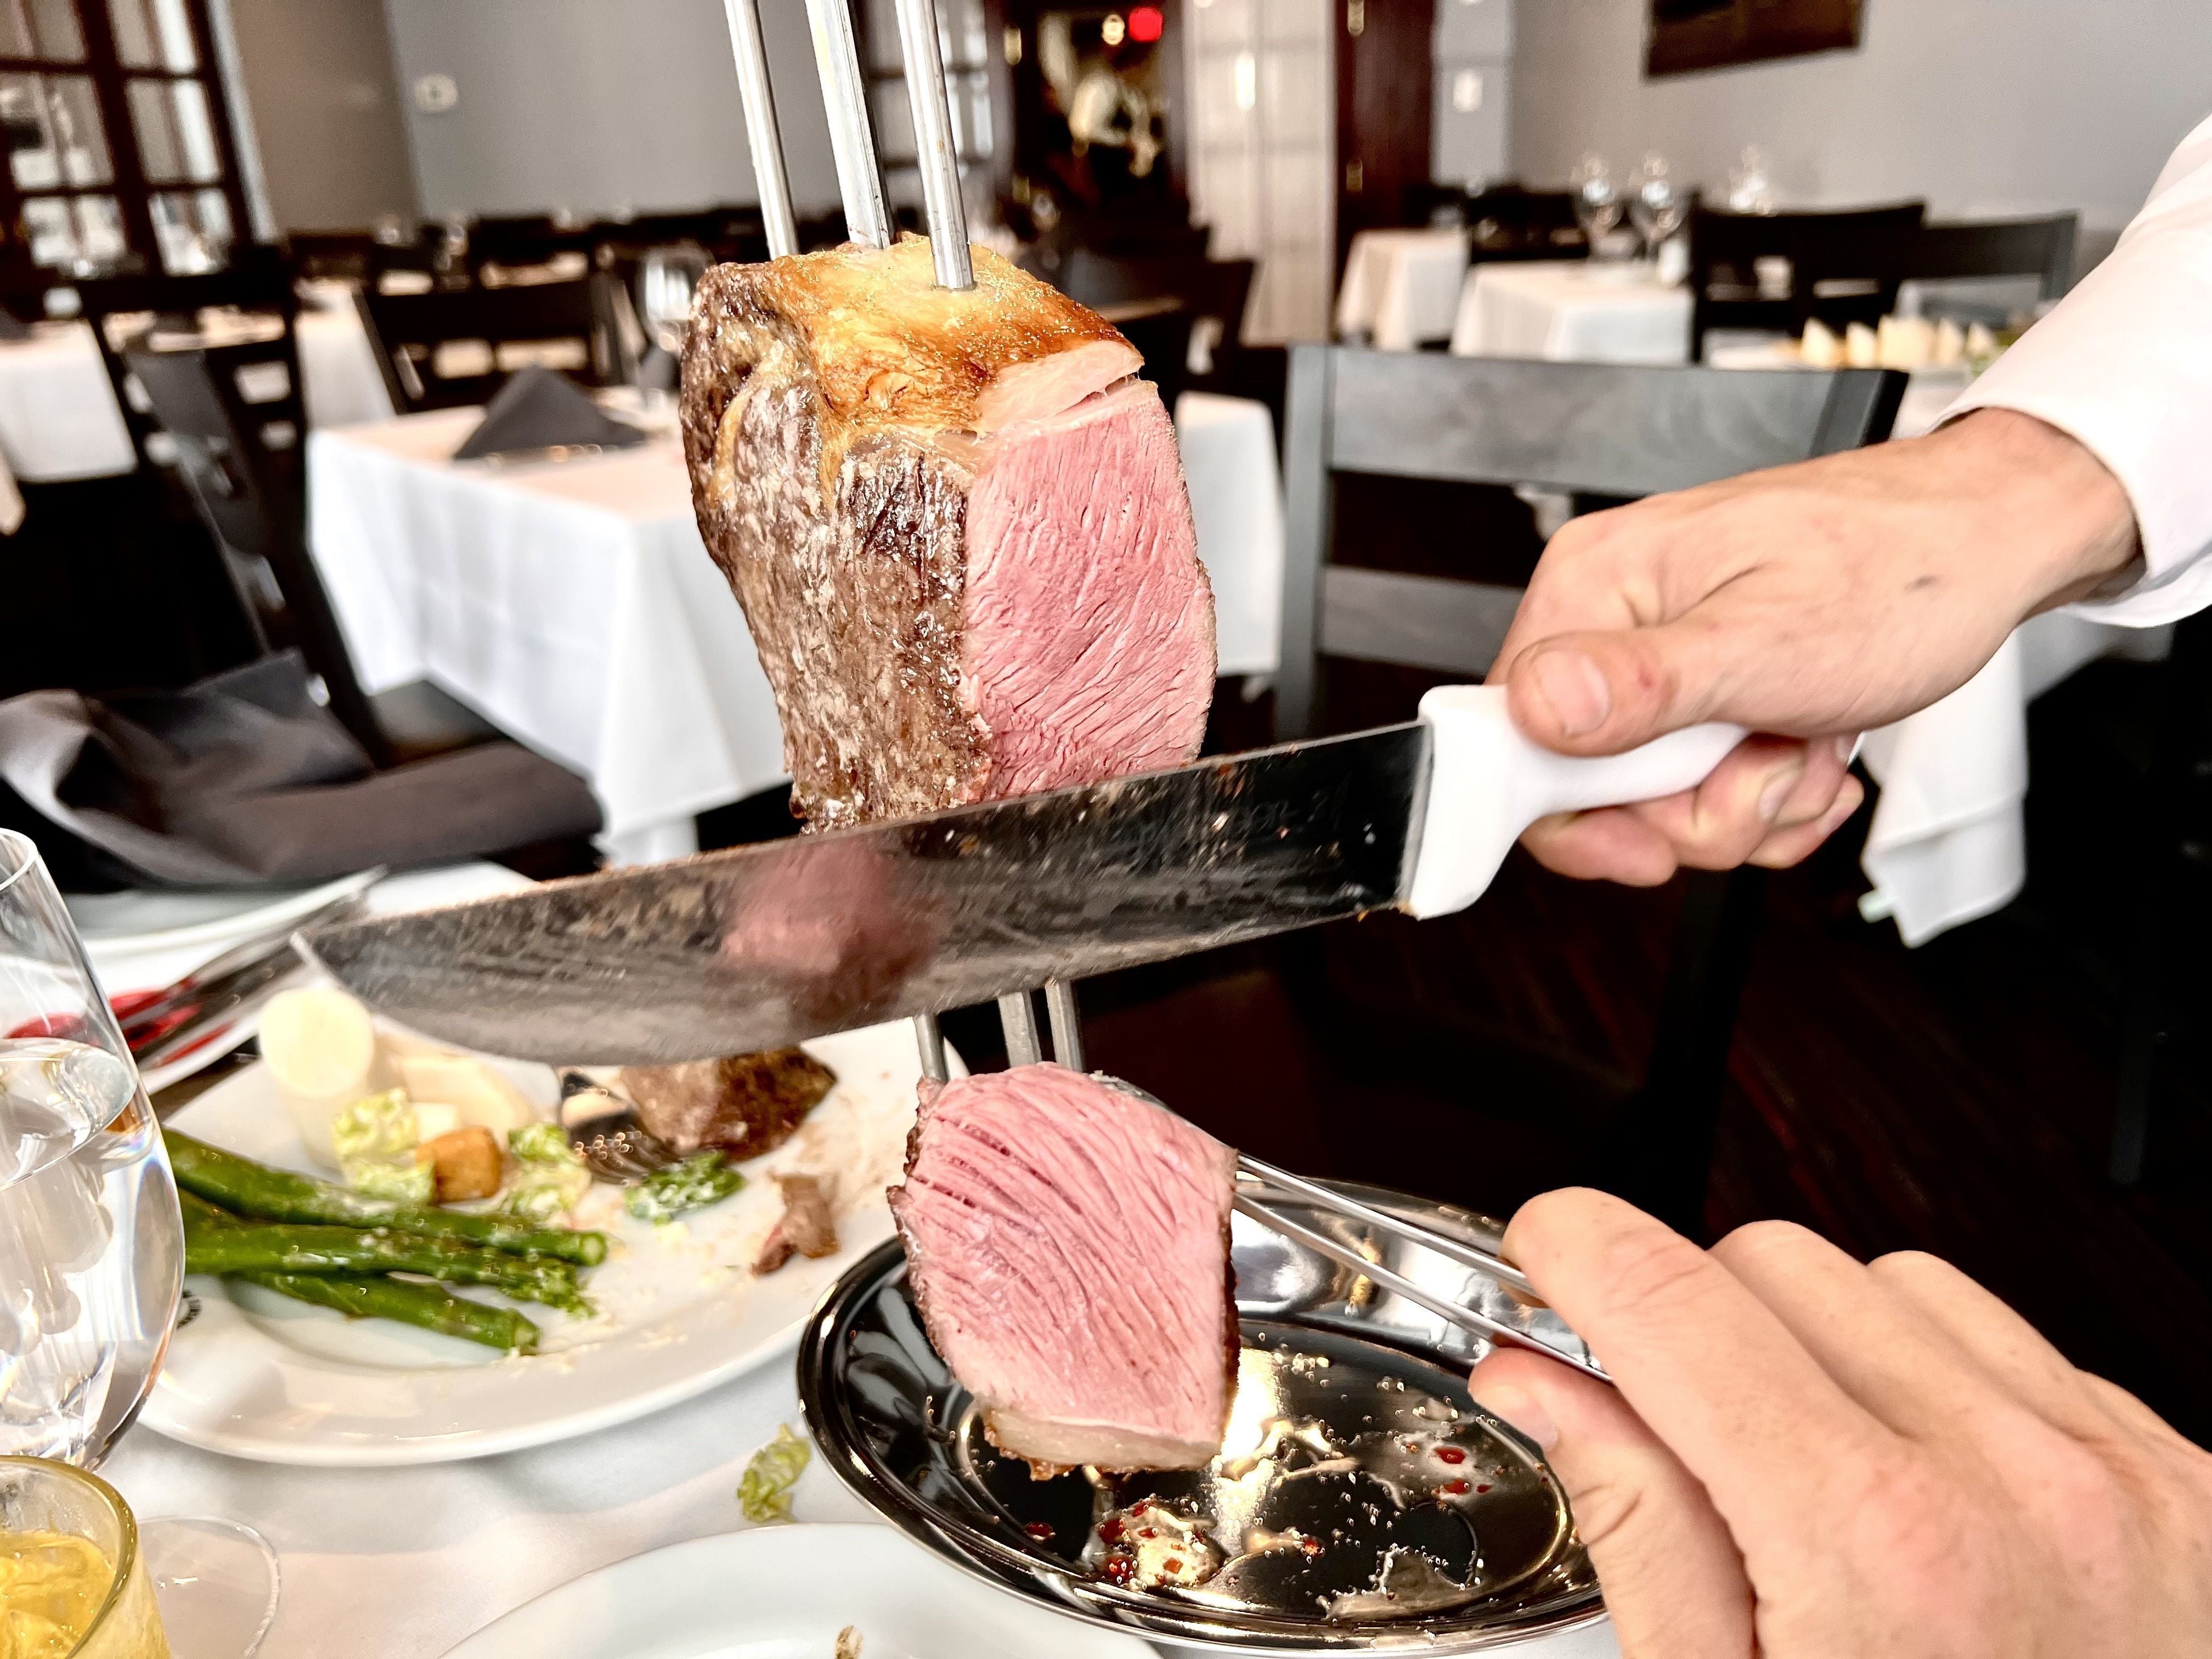 Your Local Steakhouse Does Not Want You to Read This